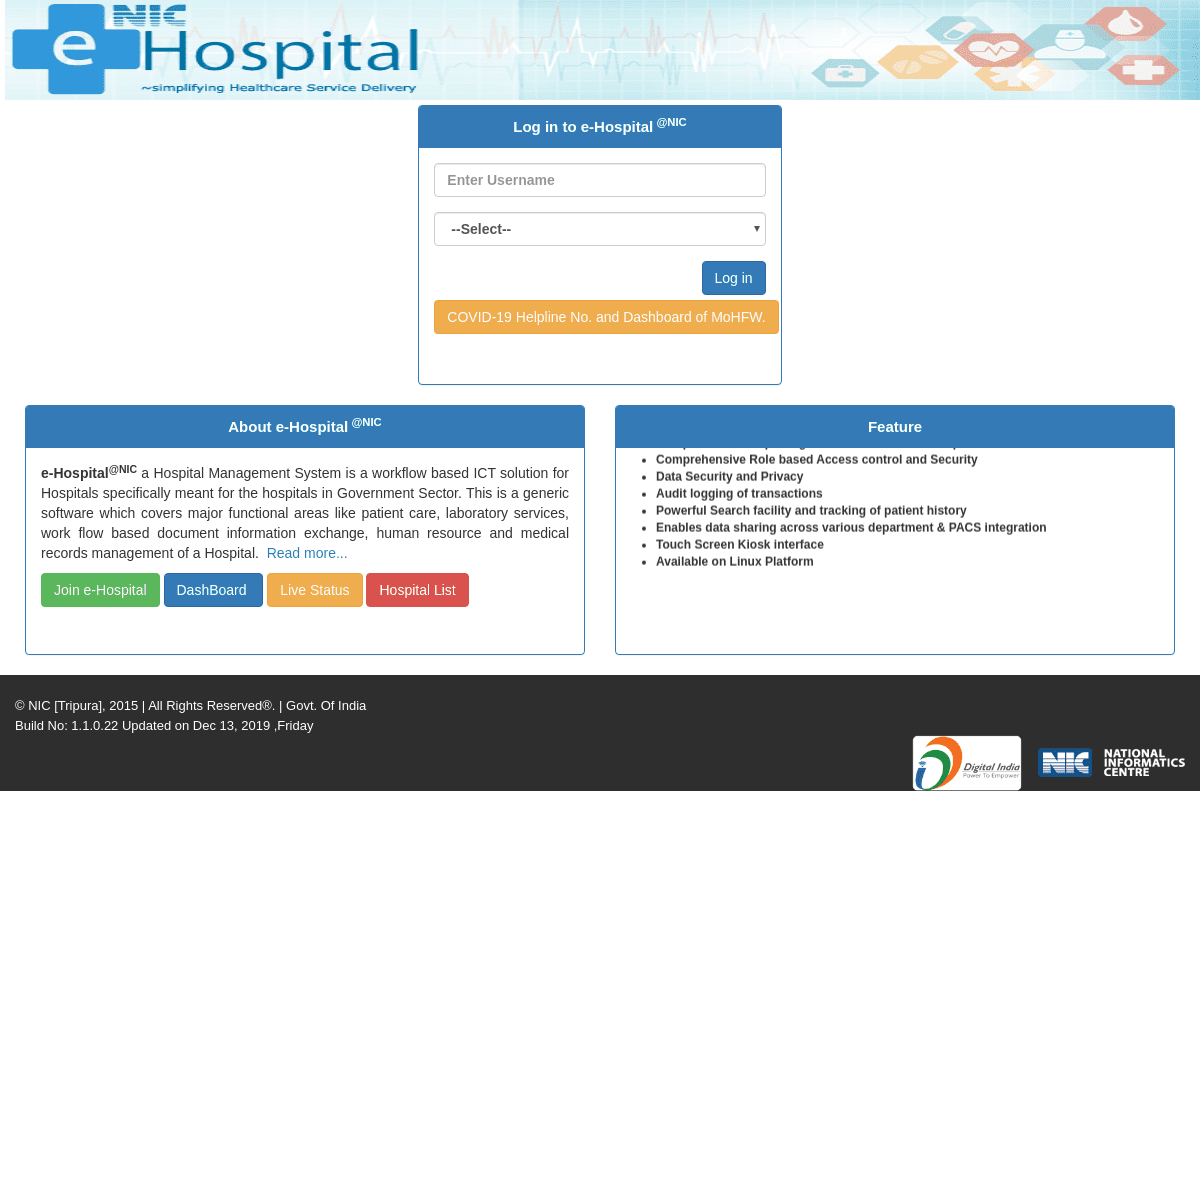 A complete backup of ehospital.gov.in